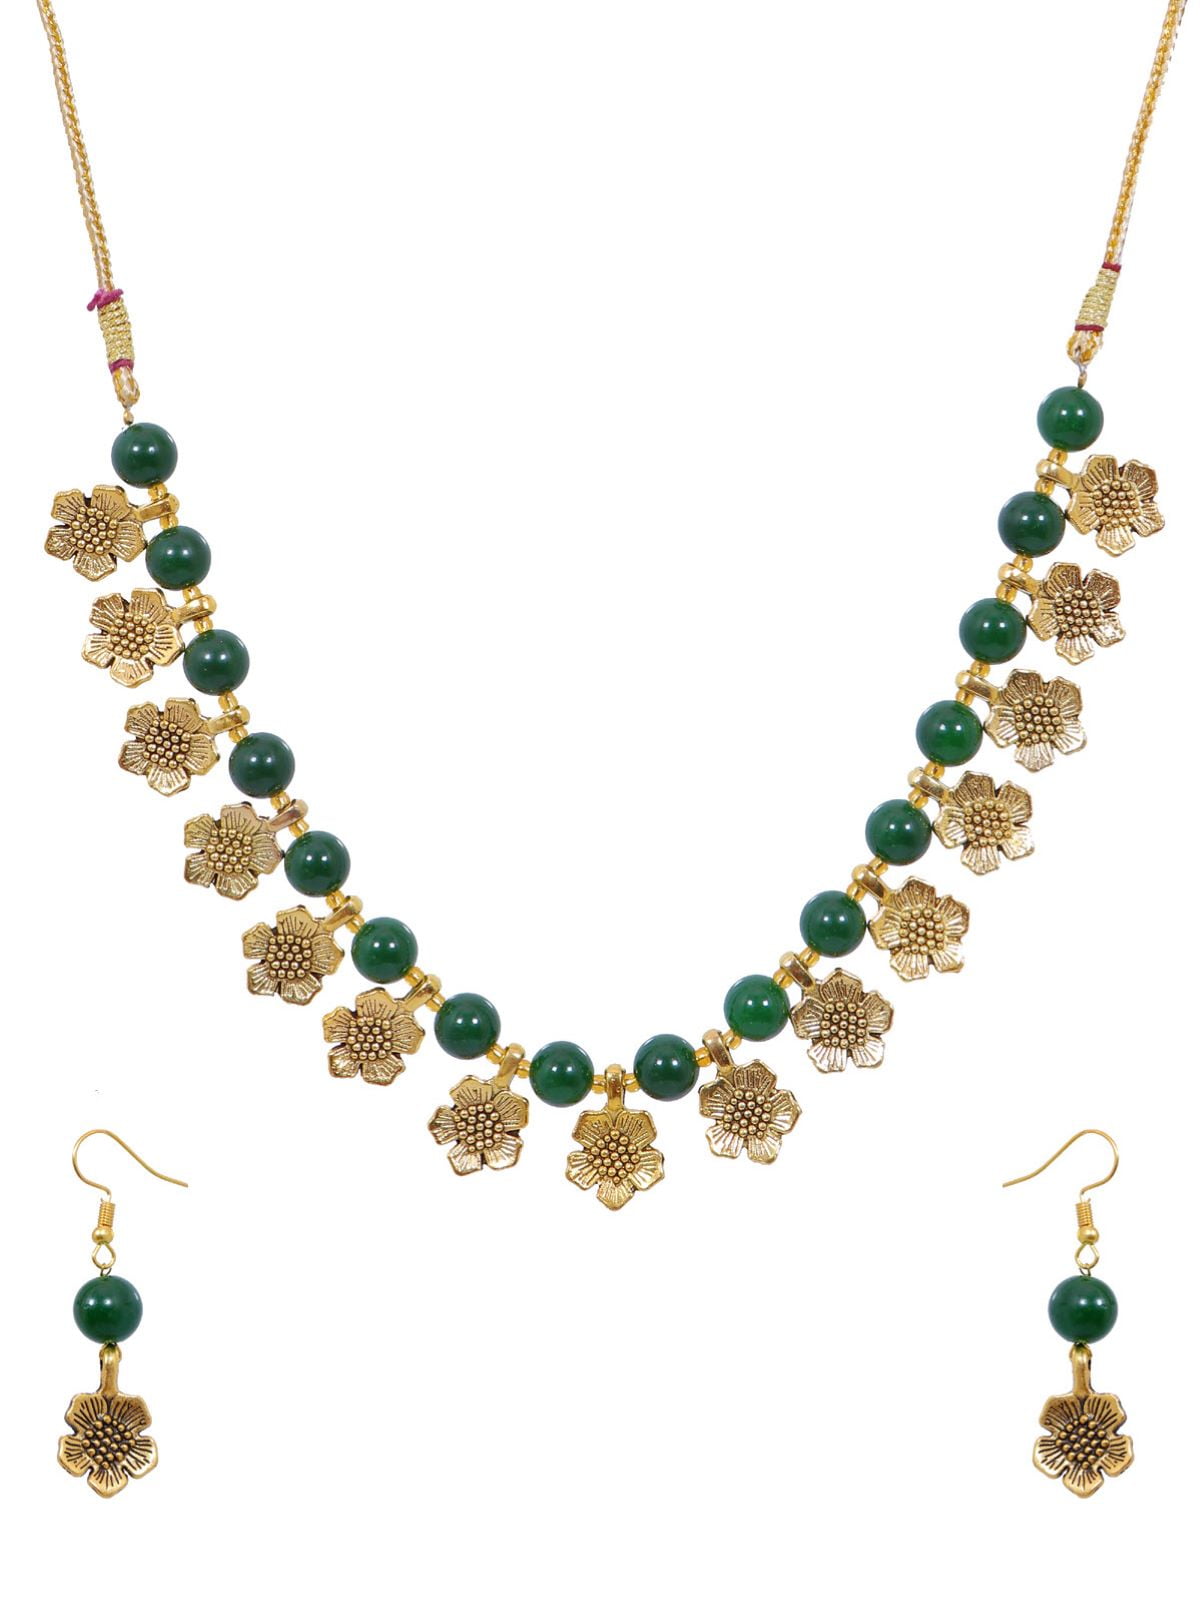 Elysee Necklace in Emerald Green | En Route Jewelry